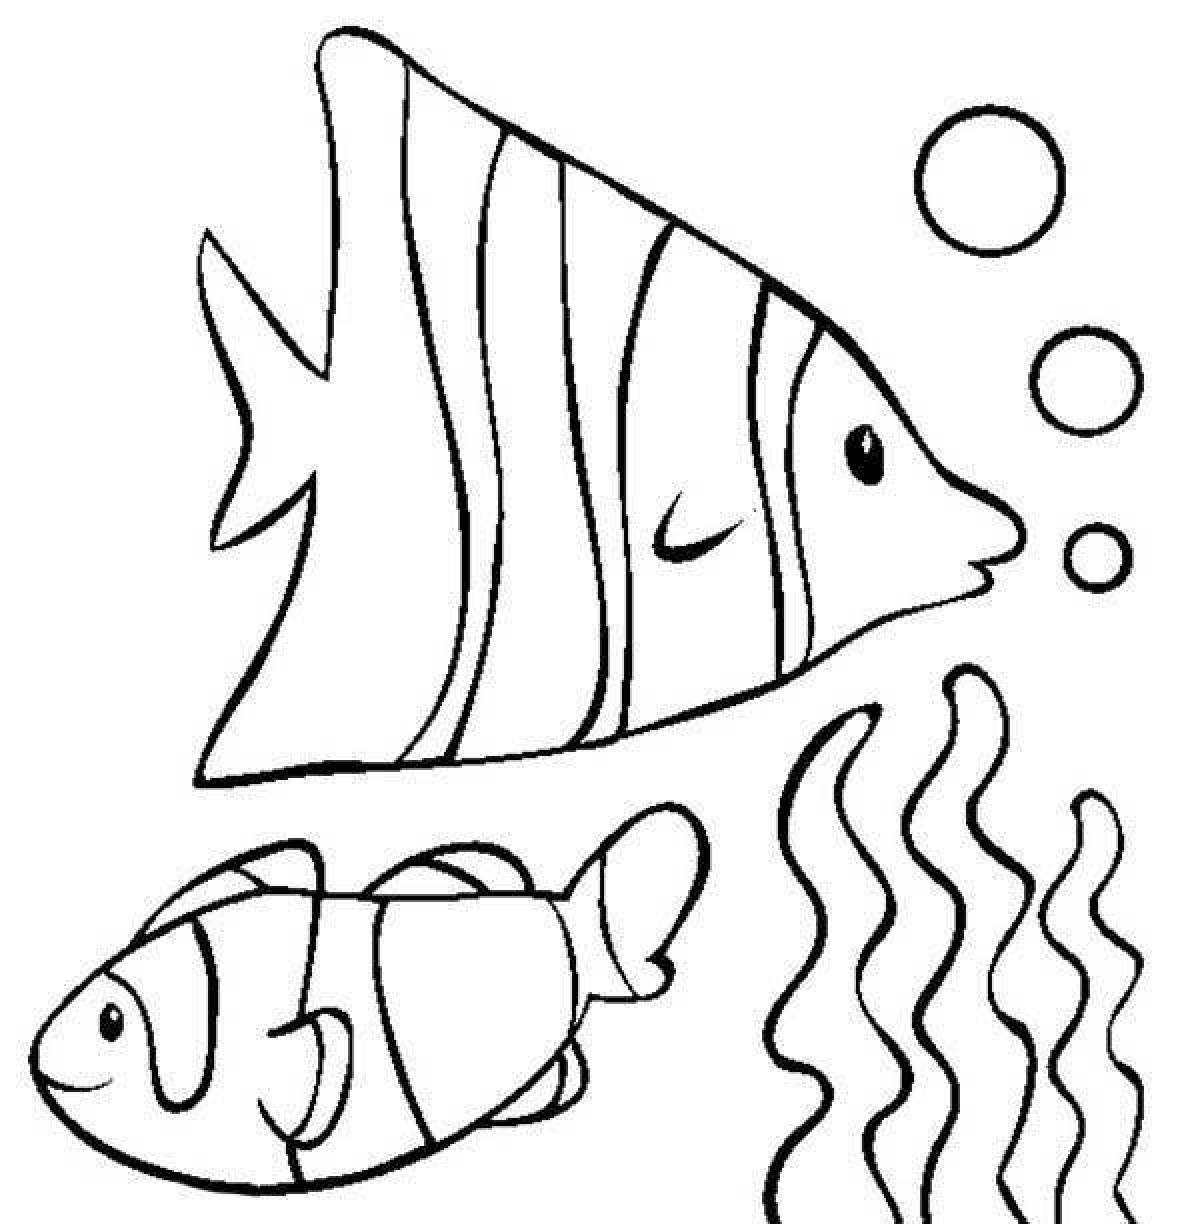 Playful fish coloring book for children 5-6 years old